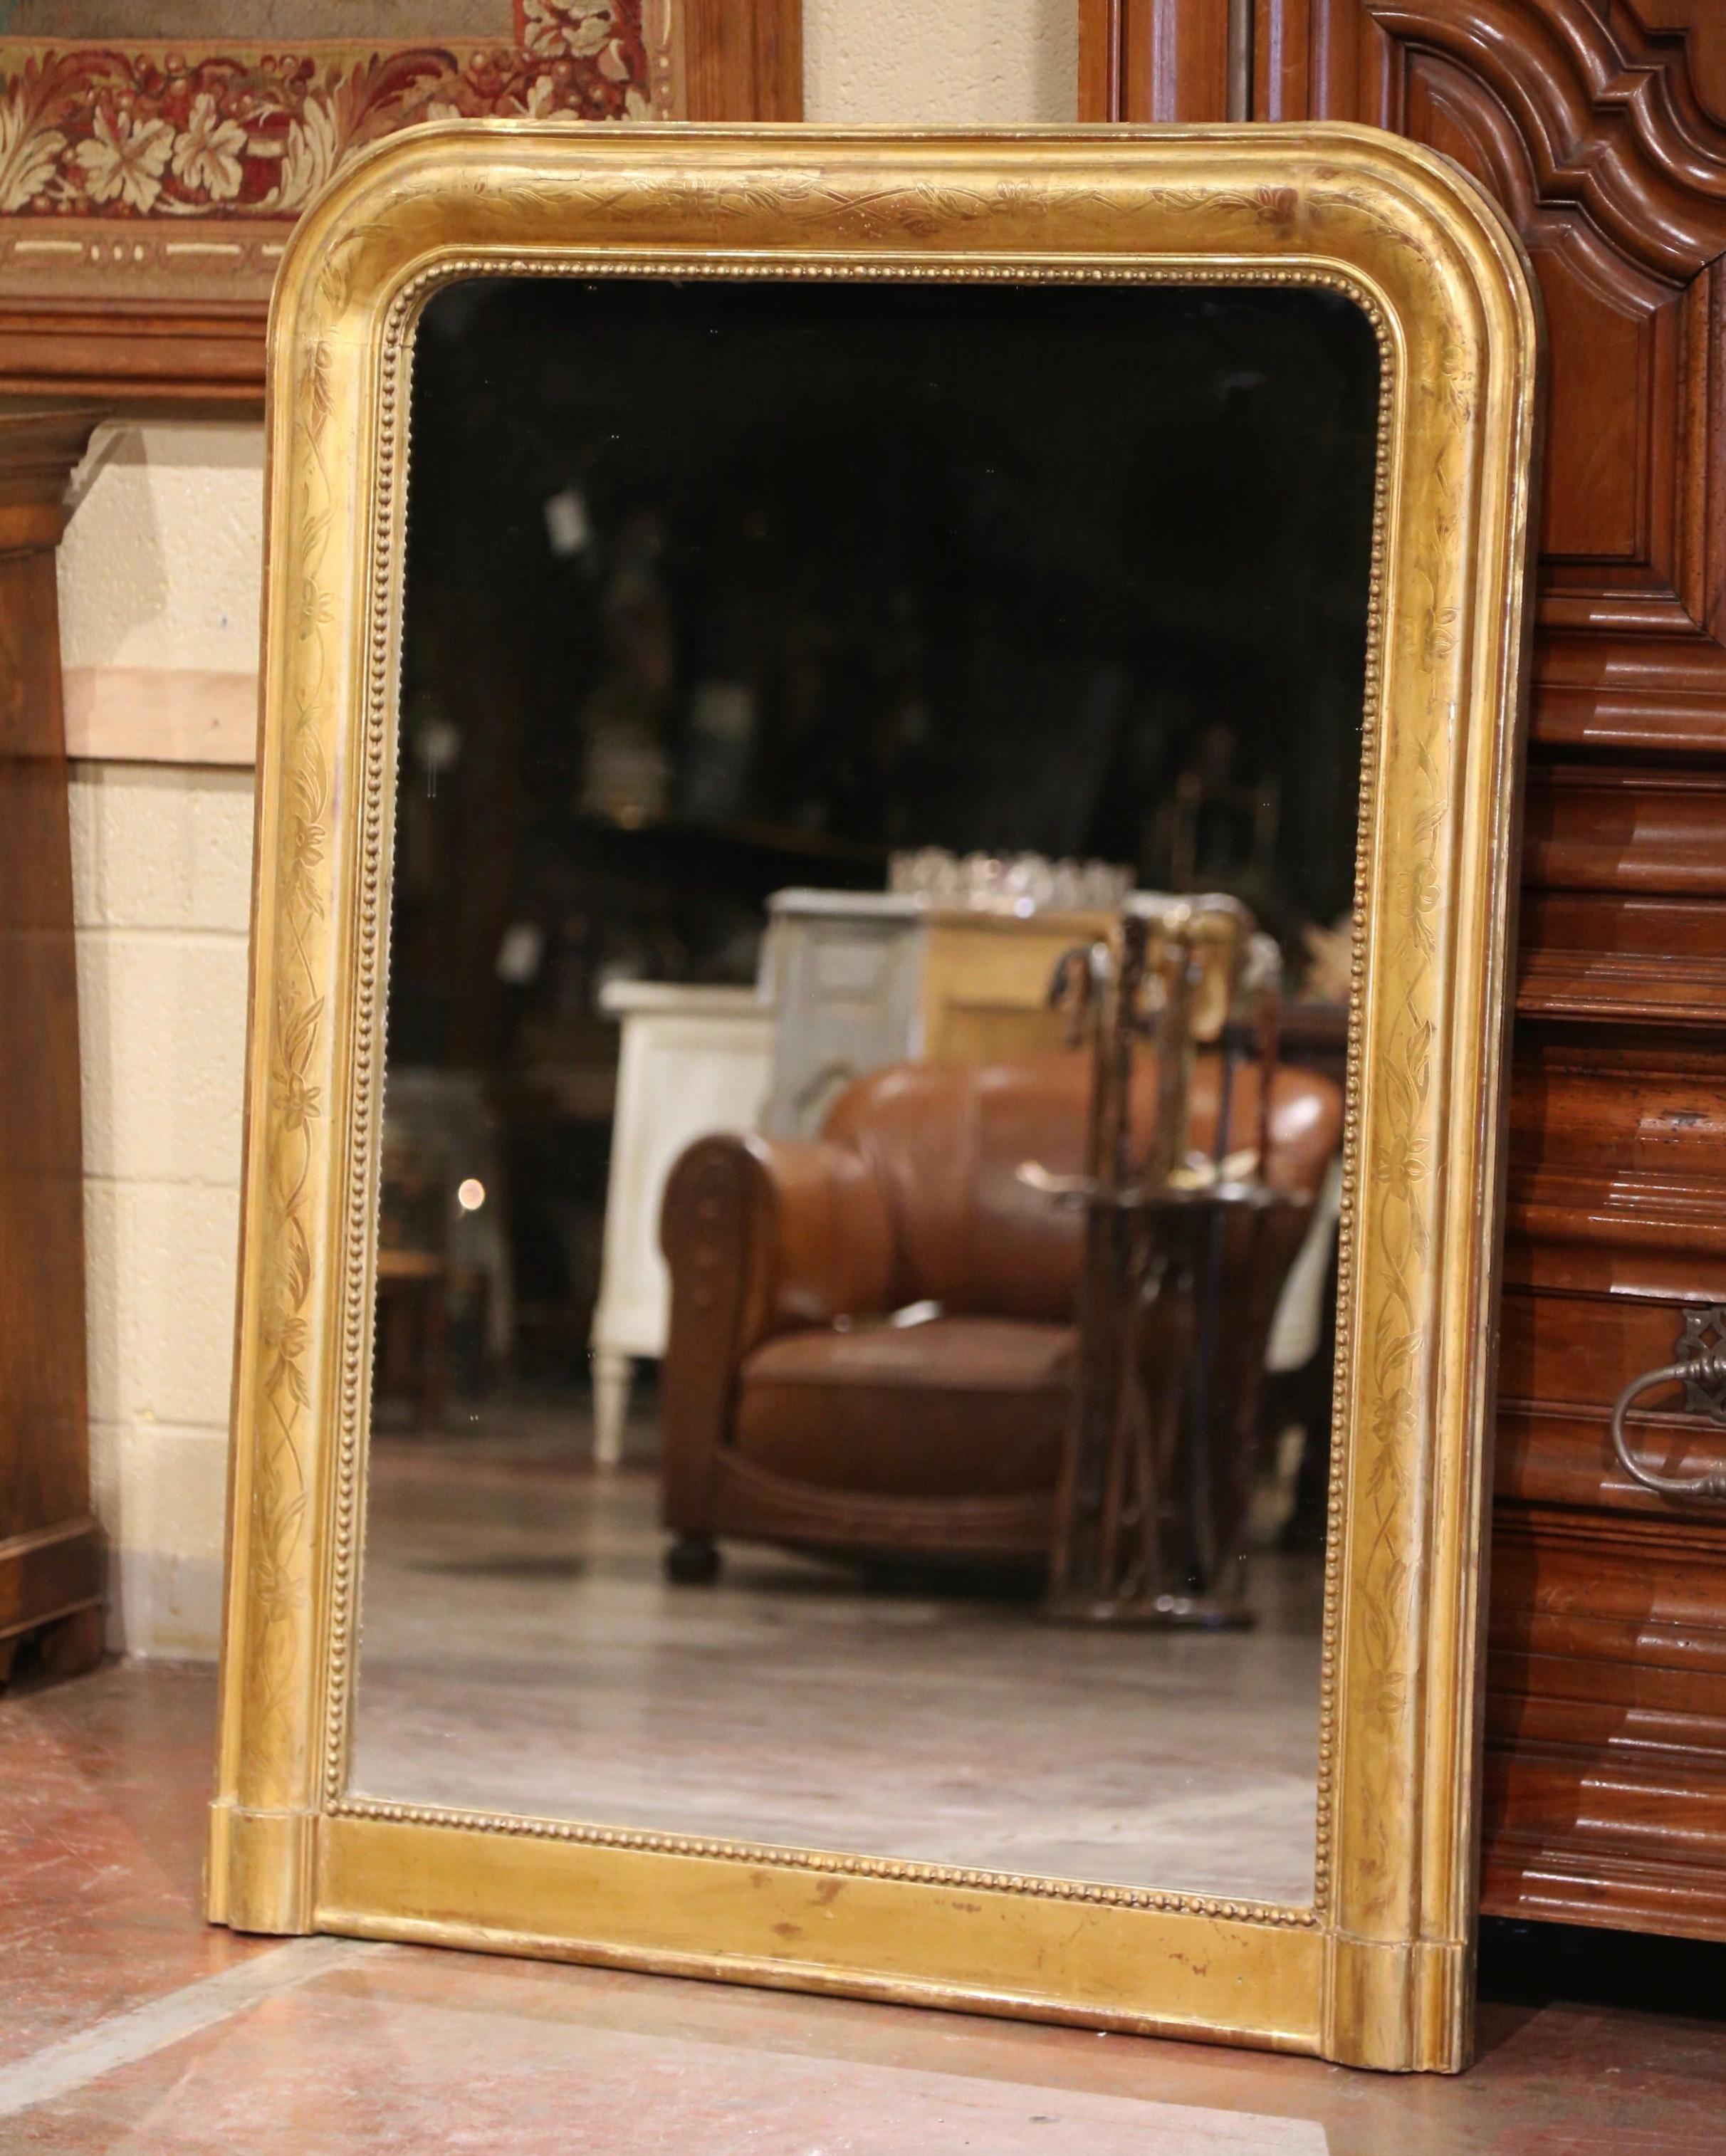 Crafted in the Burgundy region of France circa 1850, the elegant antique mirror has traditional lines with rounded corners at the top and a thick straight plinth form at the bottom. The rectangular frame is decorated with a discrete engraved floral